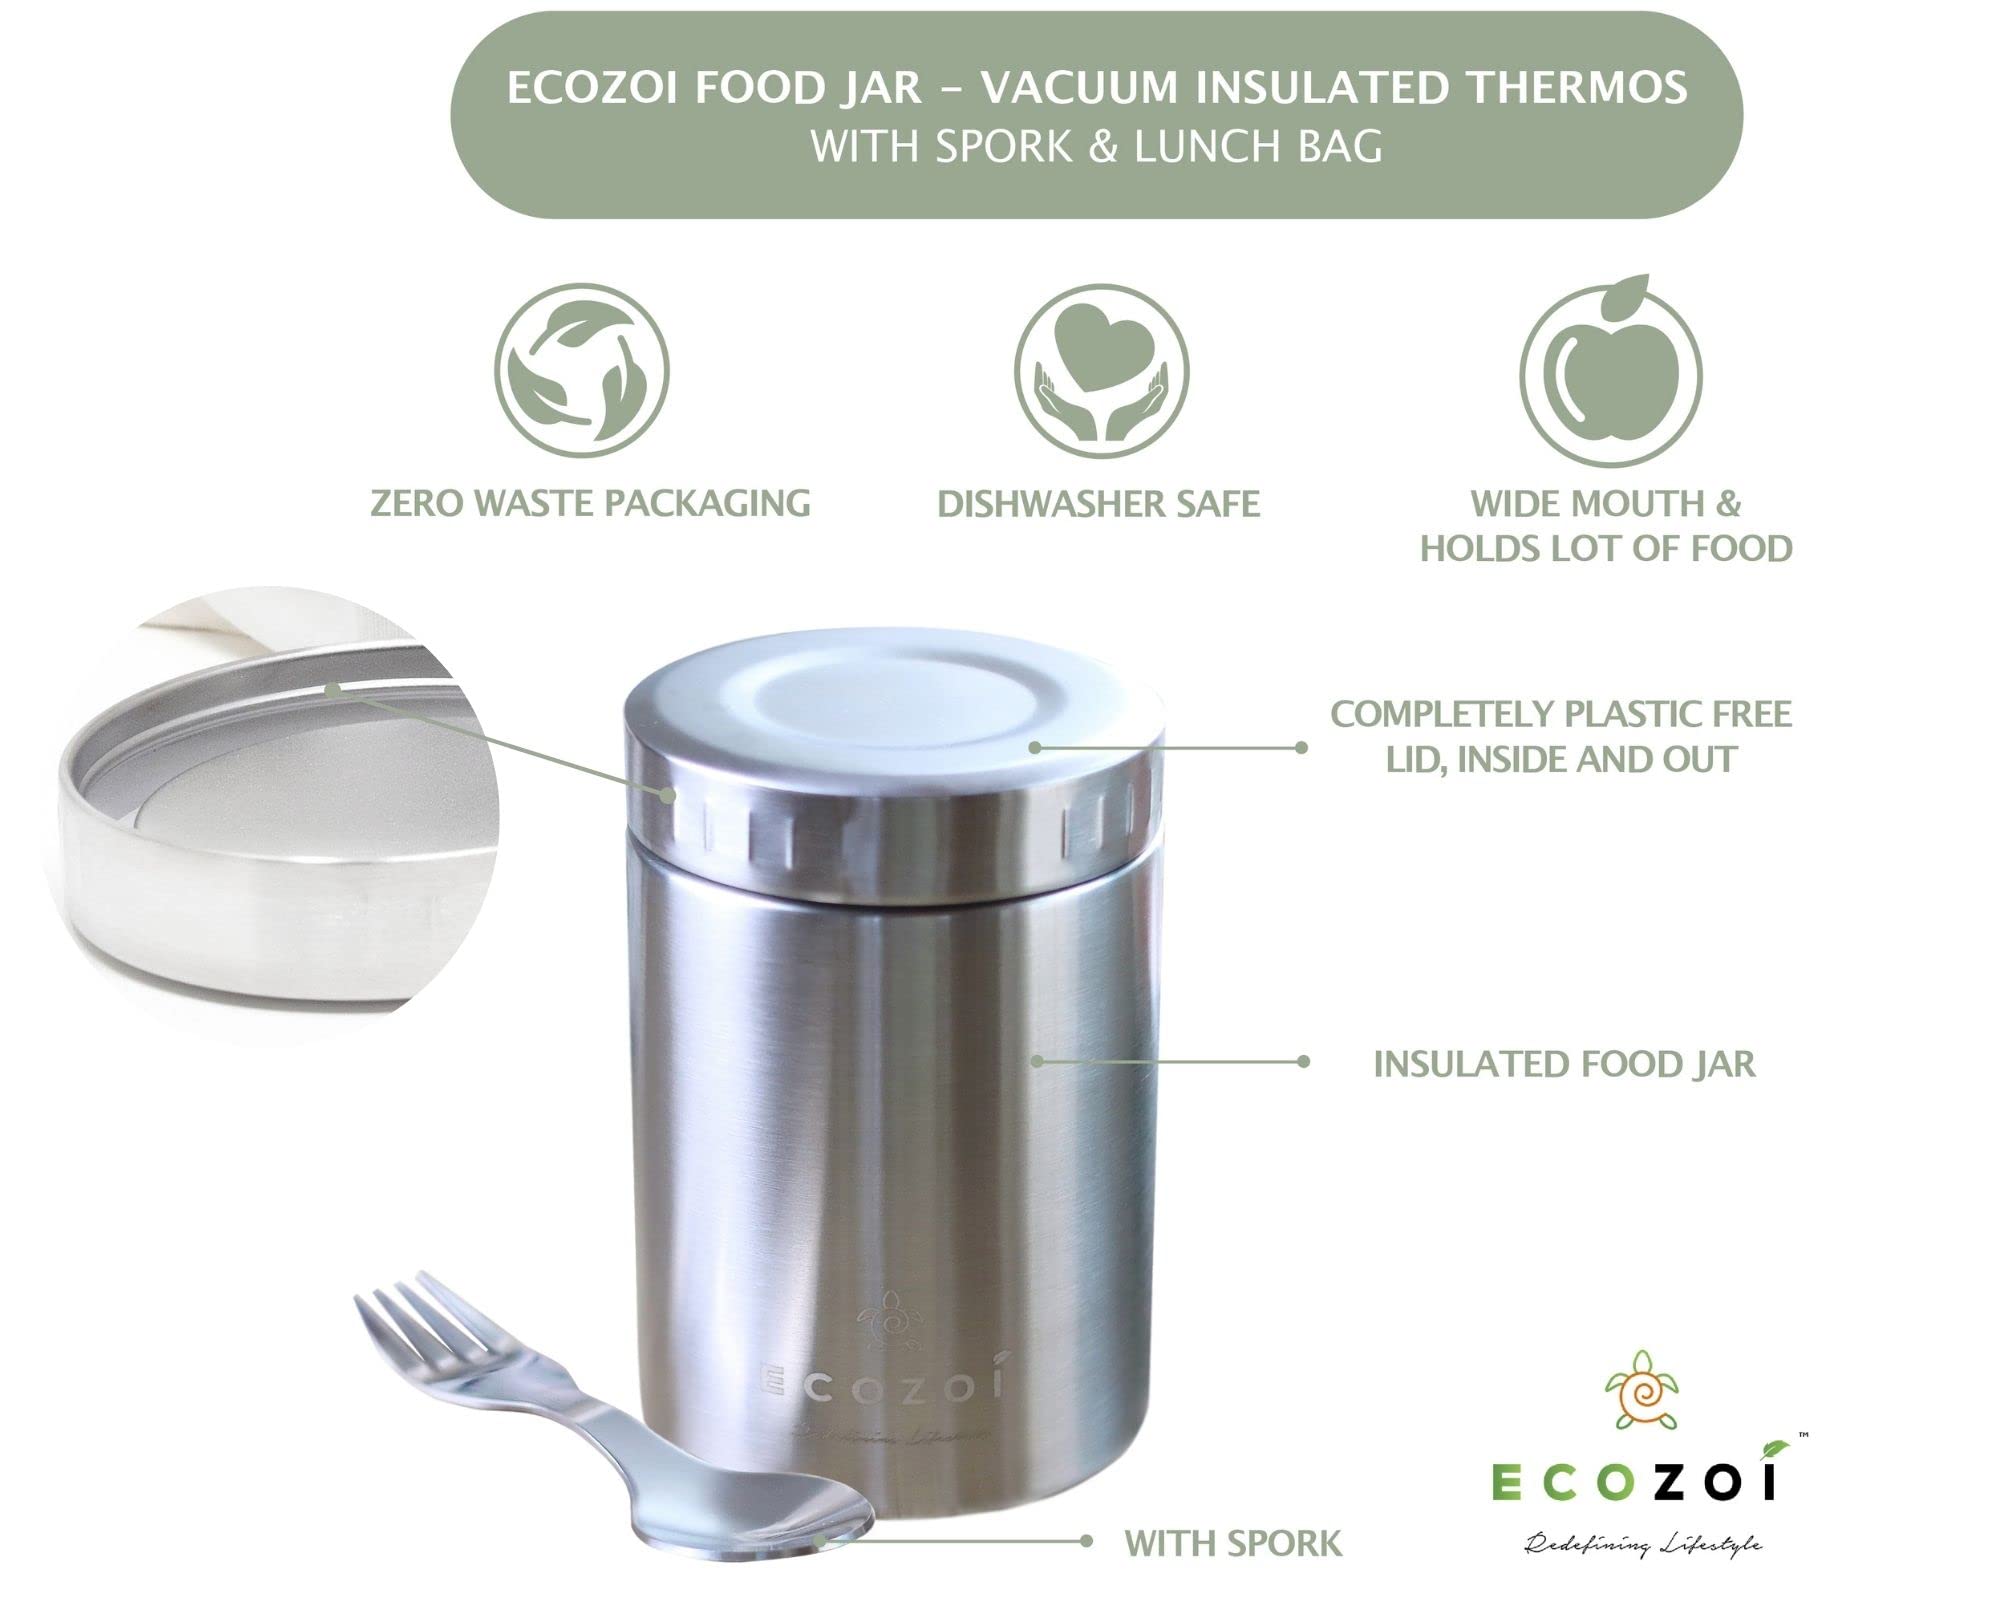 ecozoi Stainless Steel Insulated Lunch Box, Food Jar - Vacuum Insulated Thermos, 17 Oz + Spork + Lunch Bag